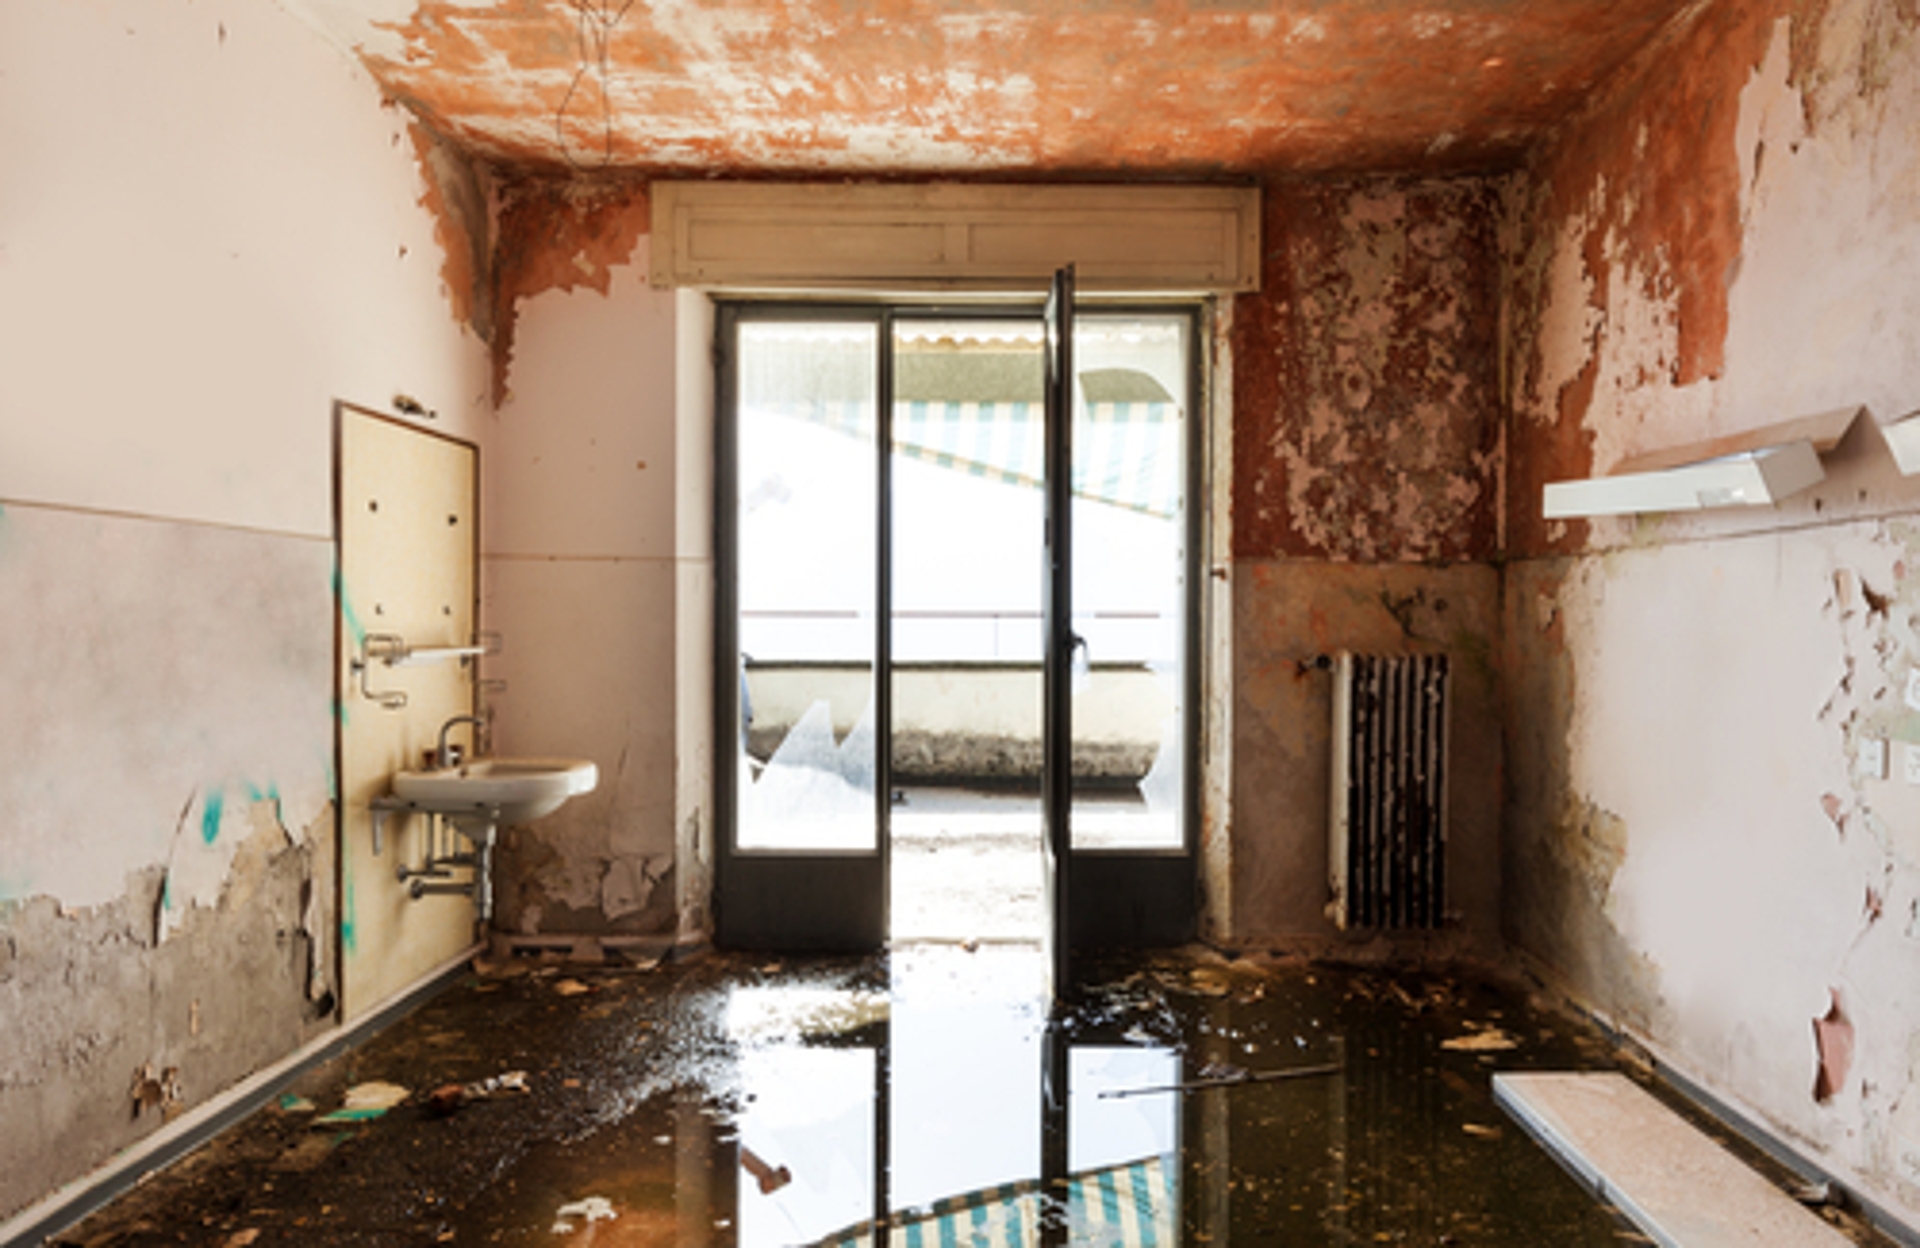 For water damage restoration near you, call SERVPRO. We are available 24/7, including weekends and holidays for flood damage, emergency water removal, and cleanup. 